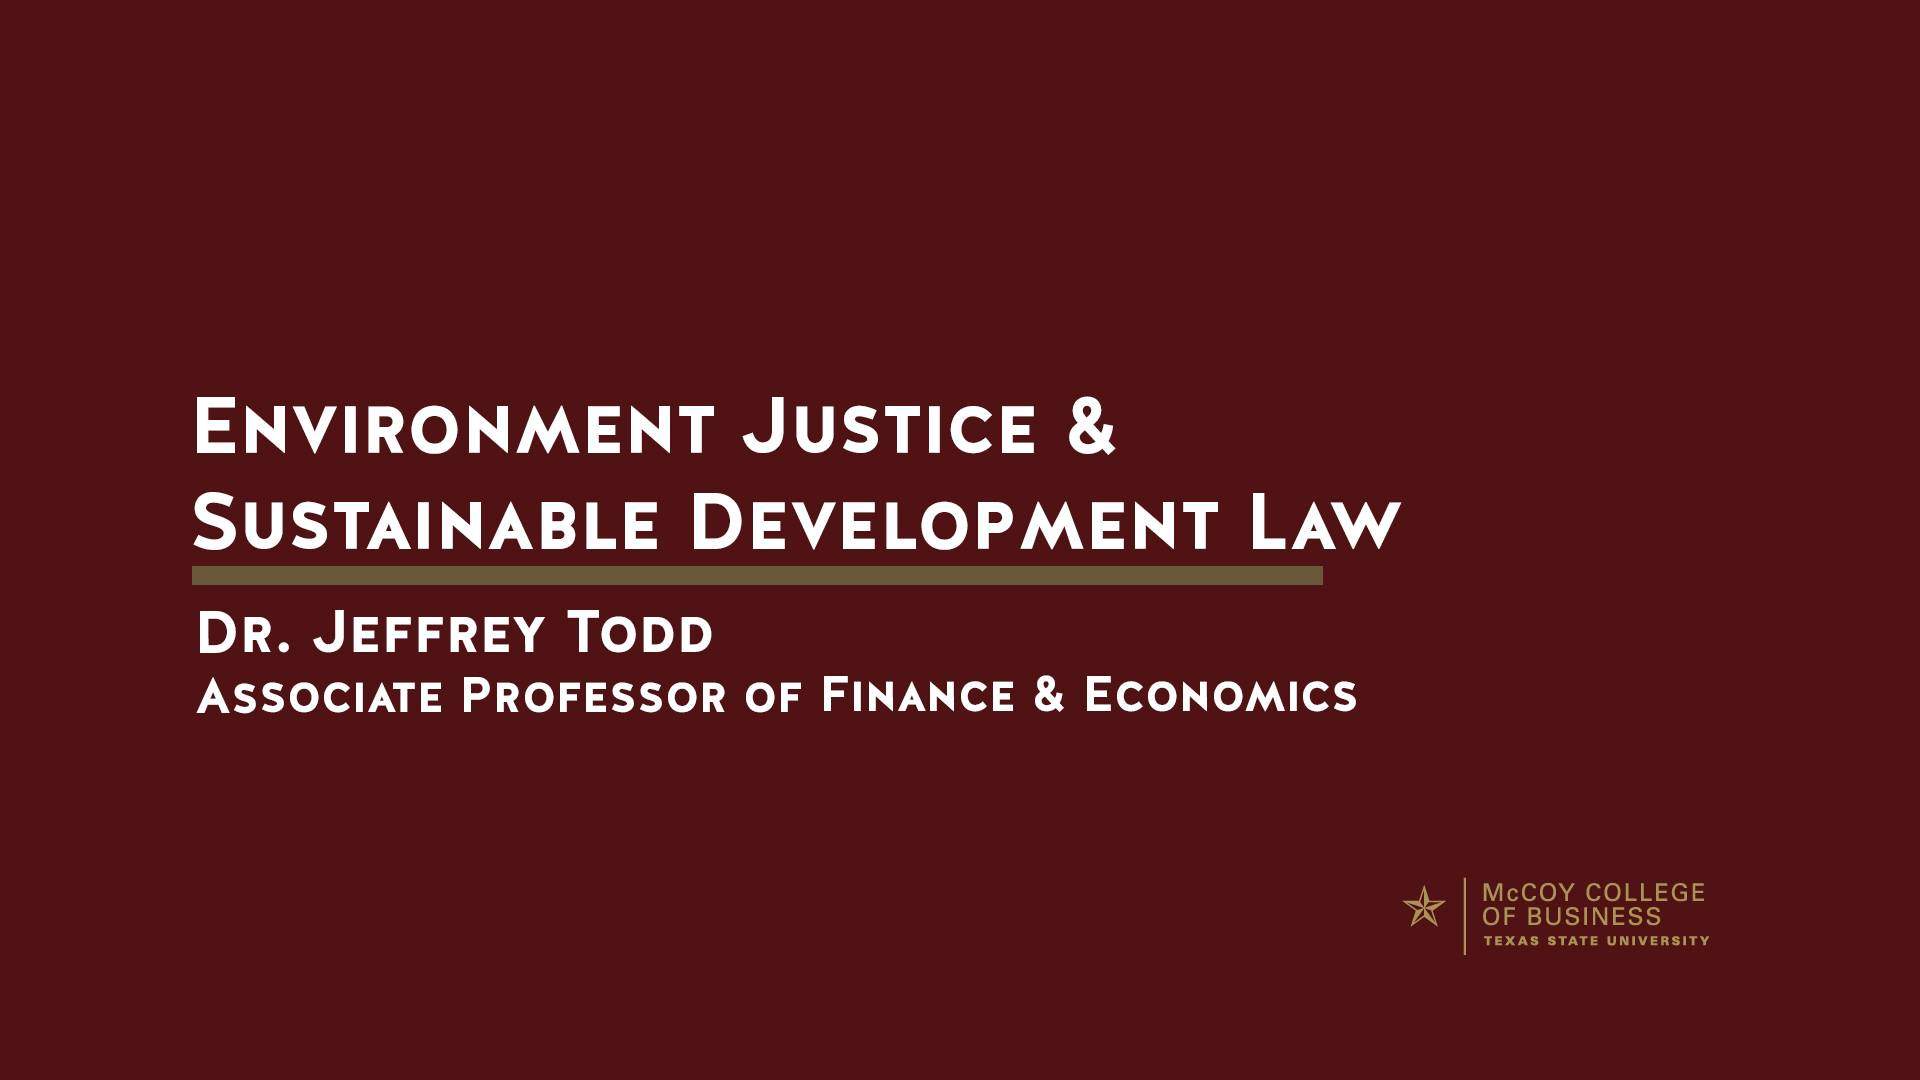 Dr. Jeffery Todd discusses Environment Justice and Sustainable Development Law